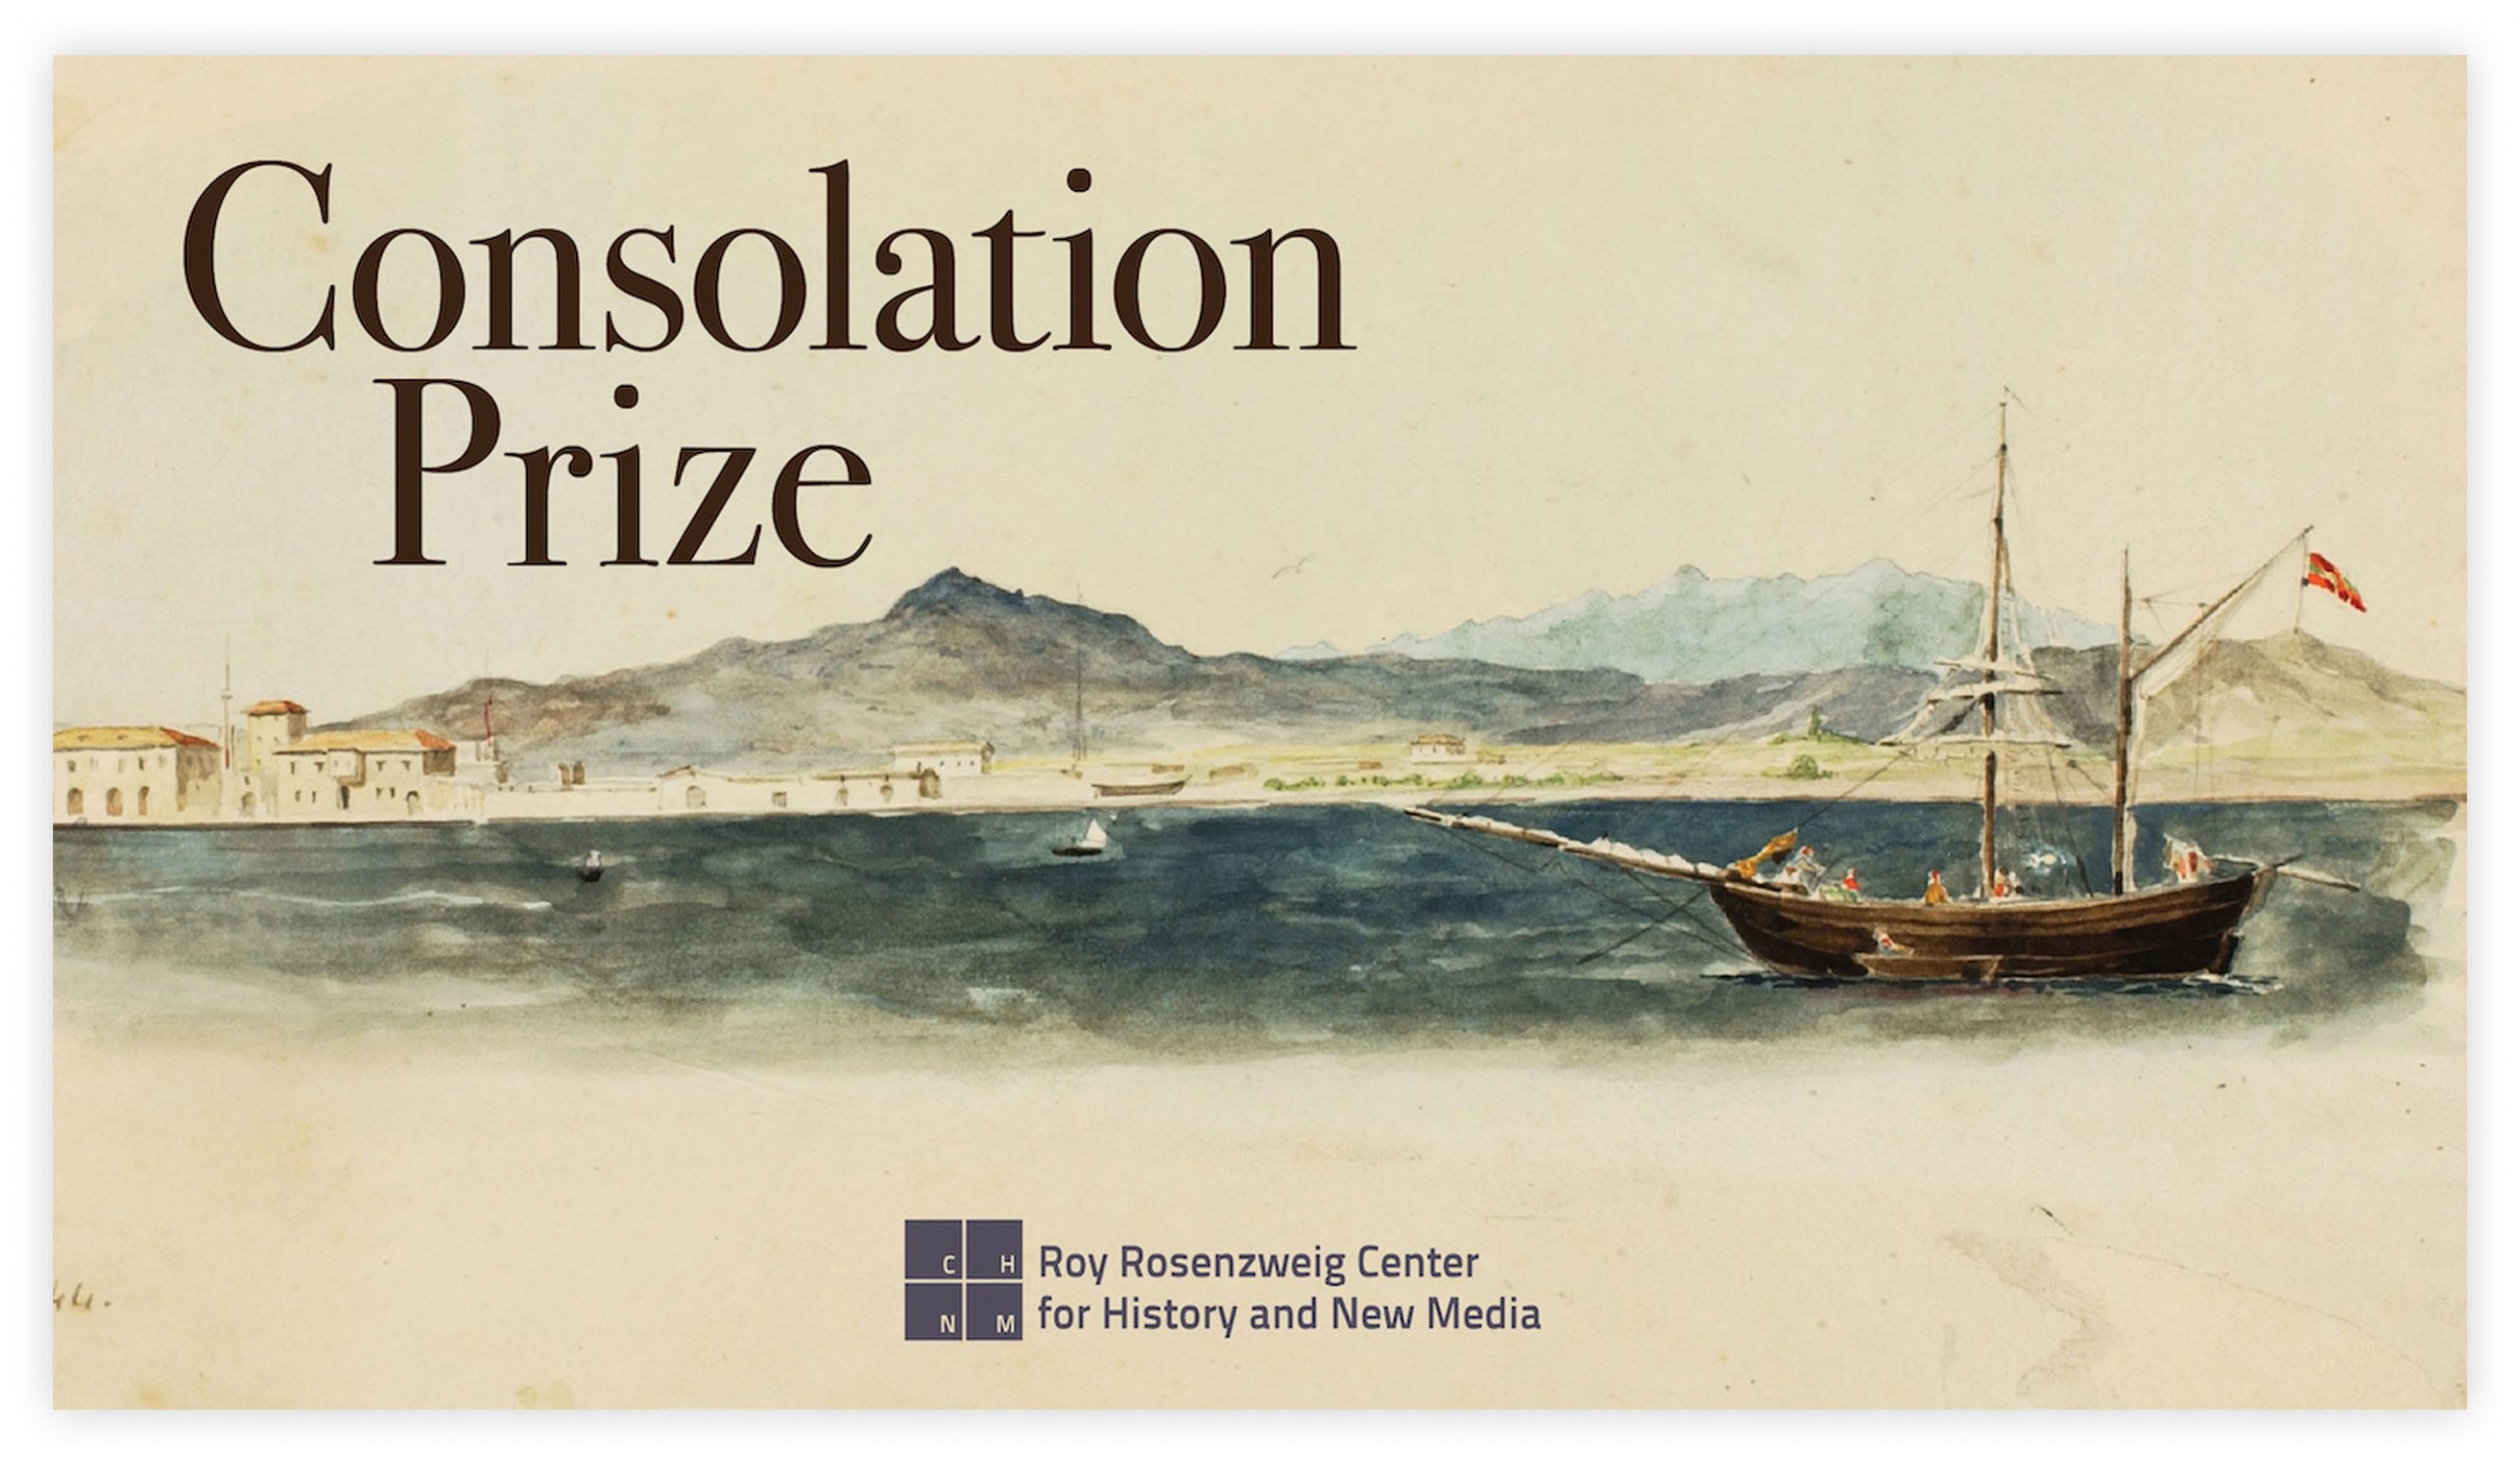 Screengrab of the Consolidation Prize website hero image depicting a watercolor of the Port of Larnaca, with a ship in the foreground.